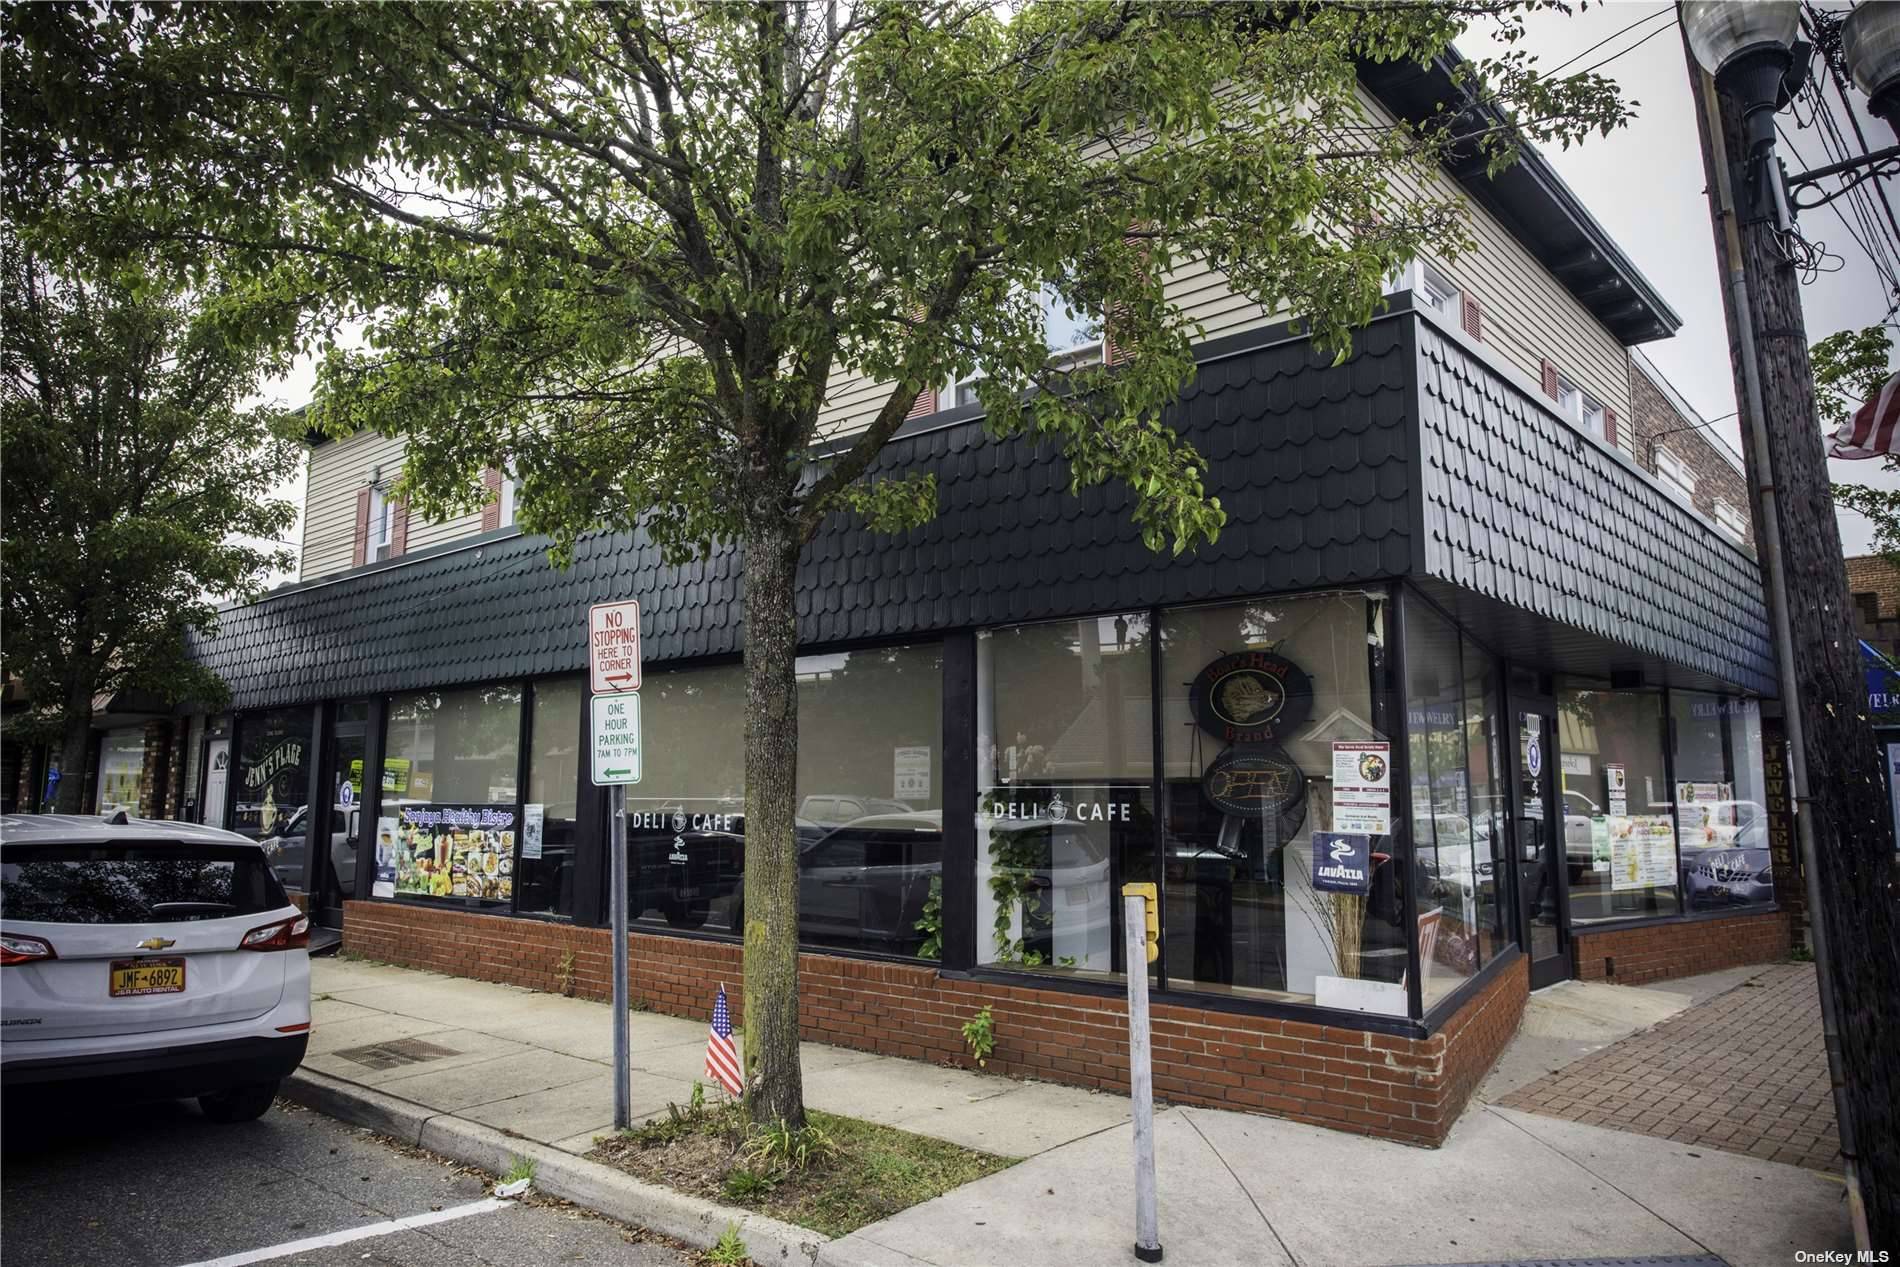 Situated across from the LIRR, don't miss this fully equipped business with so much potential to grow.